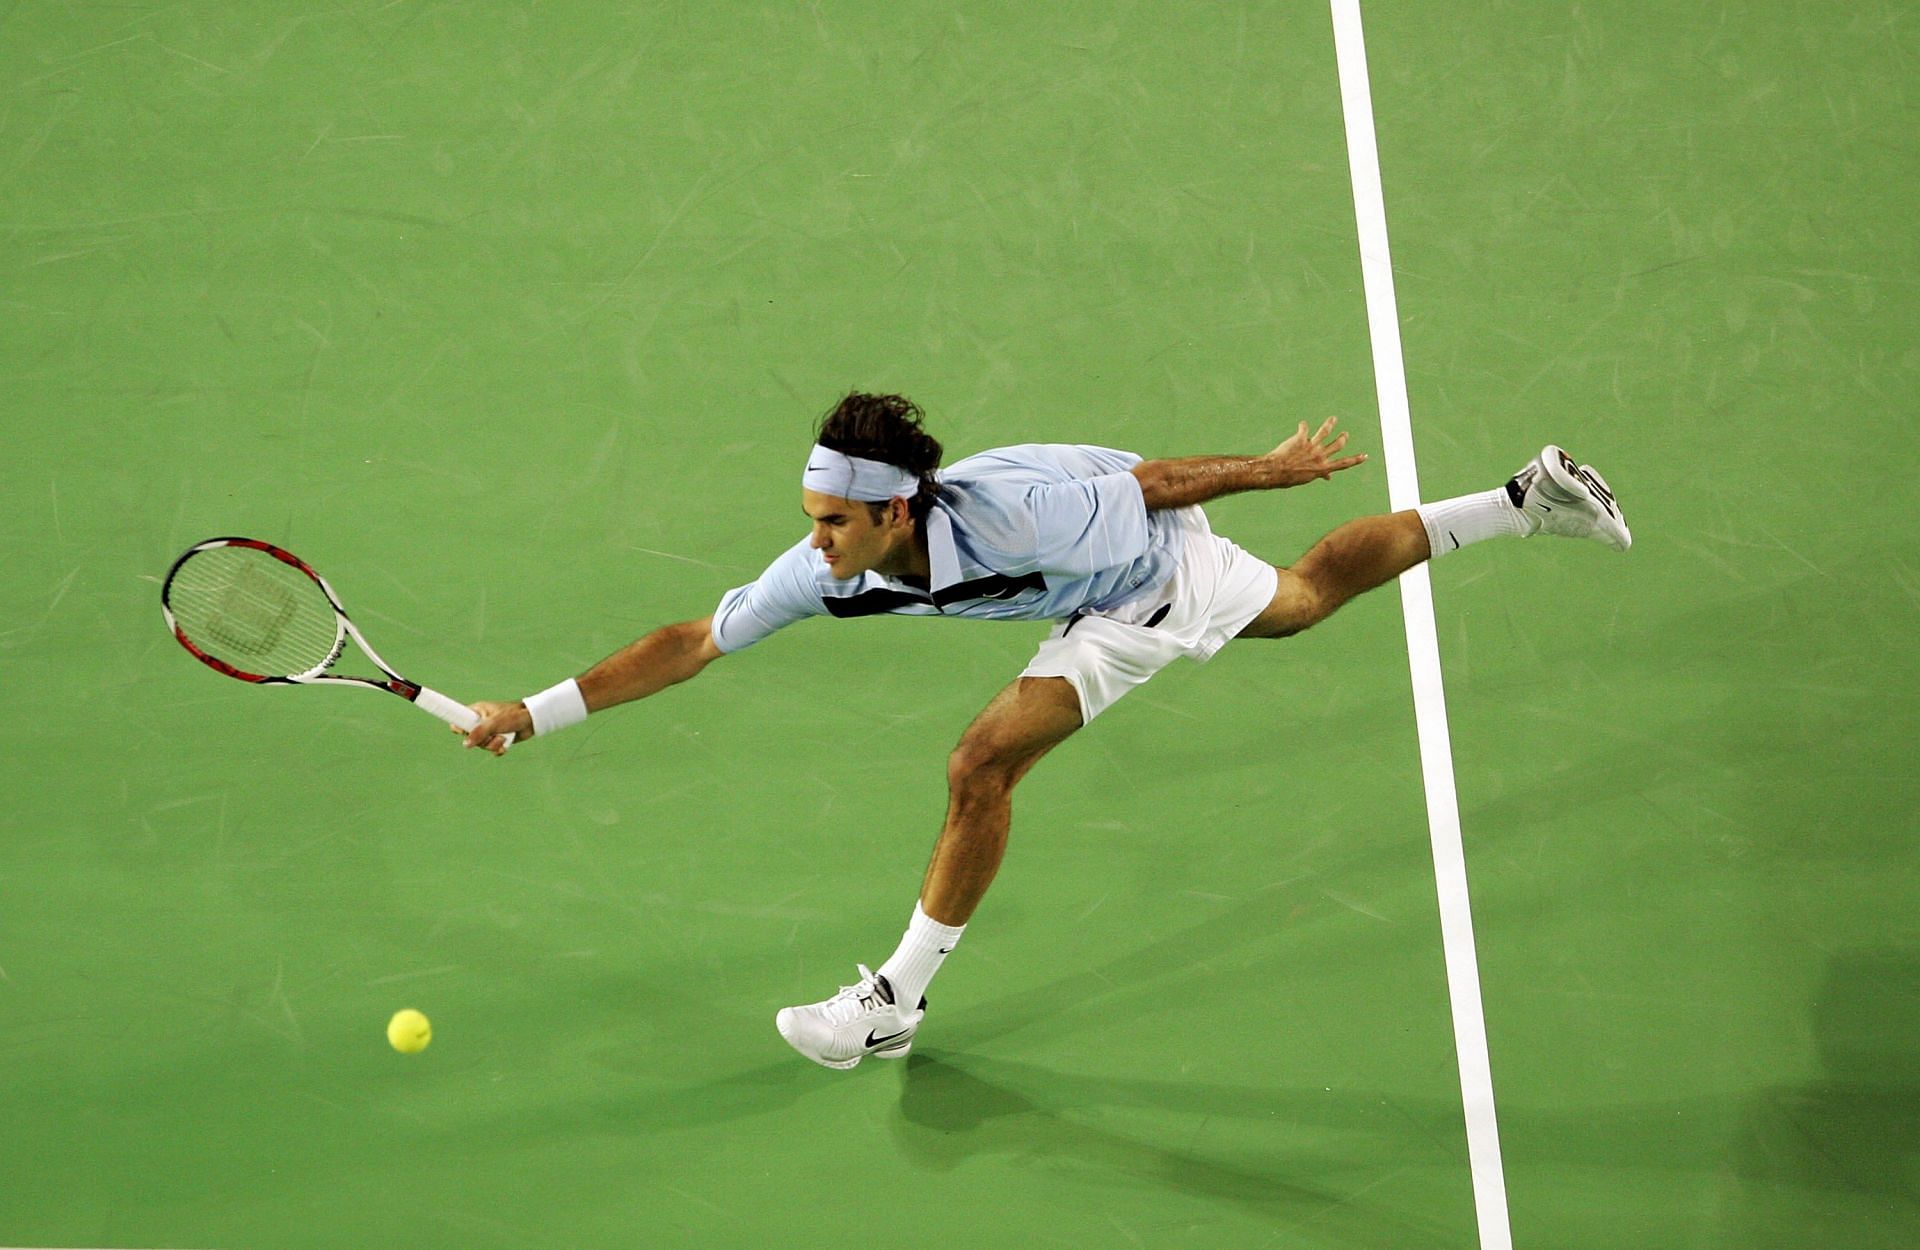 Australian Open 2007 - The great lunge from the Swiss champ